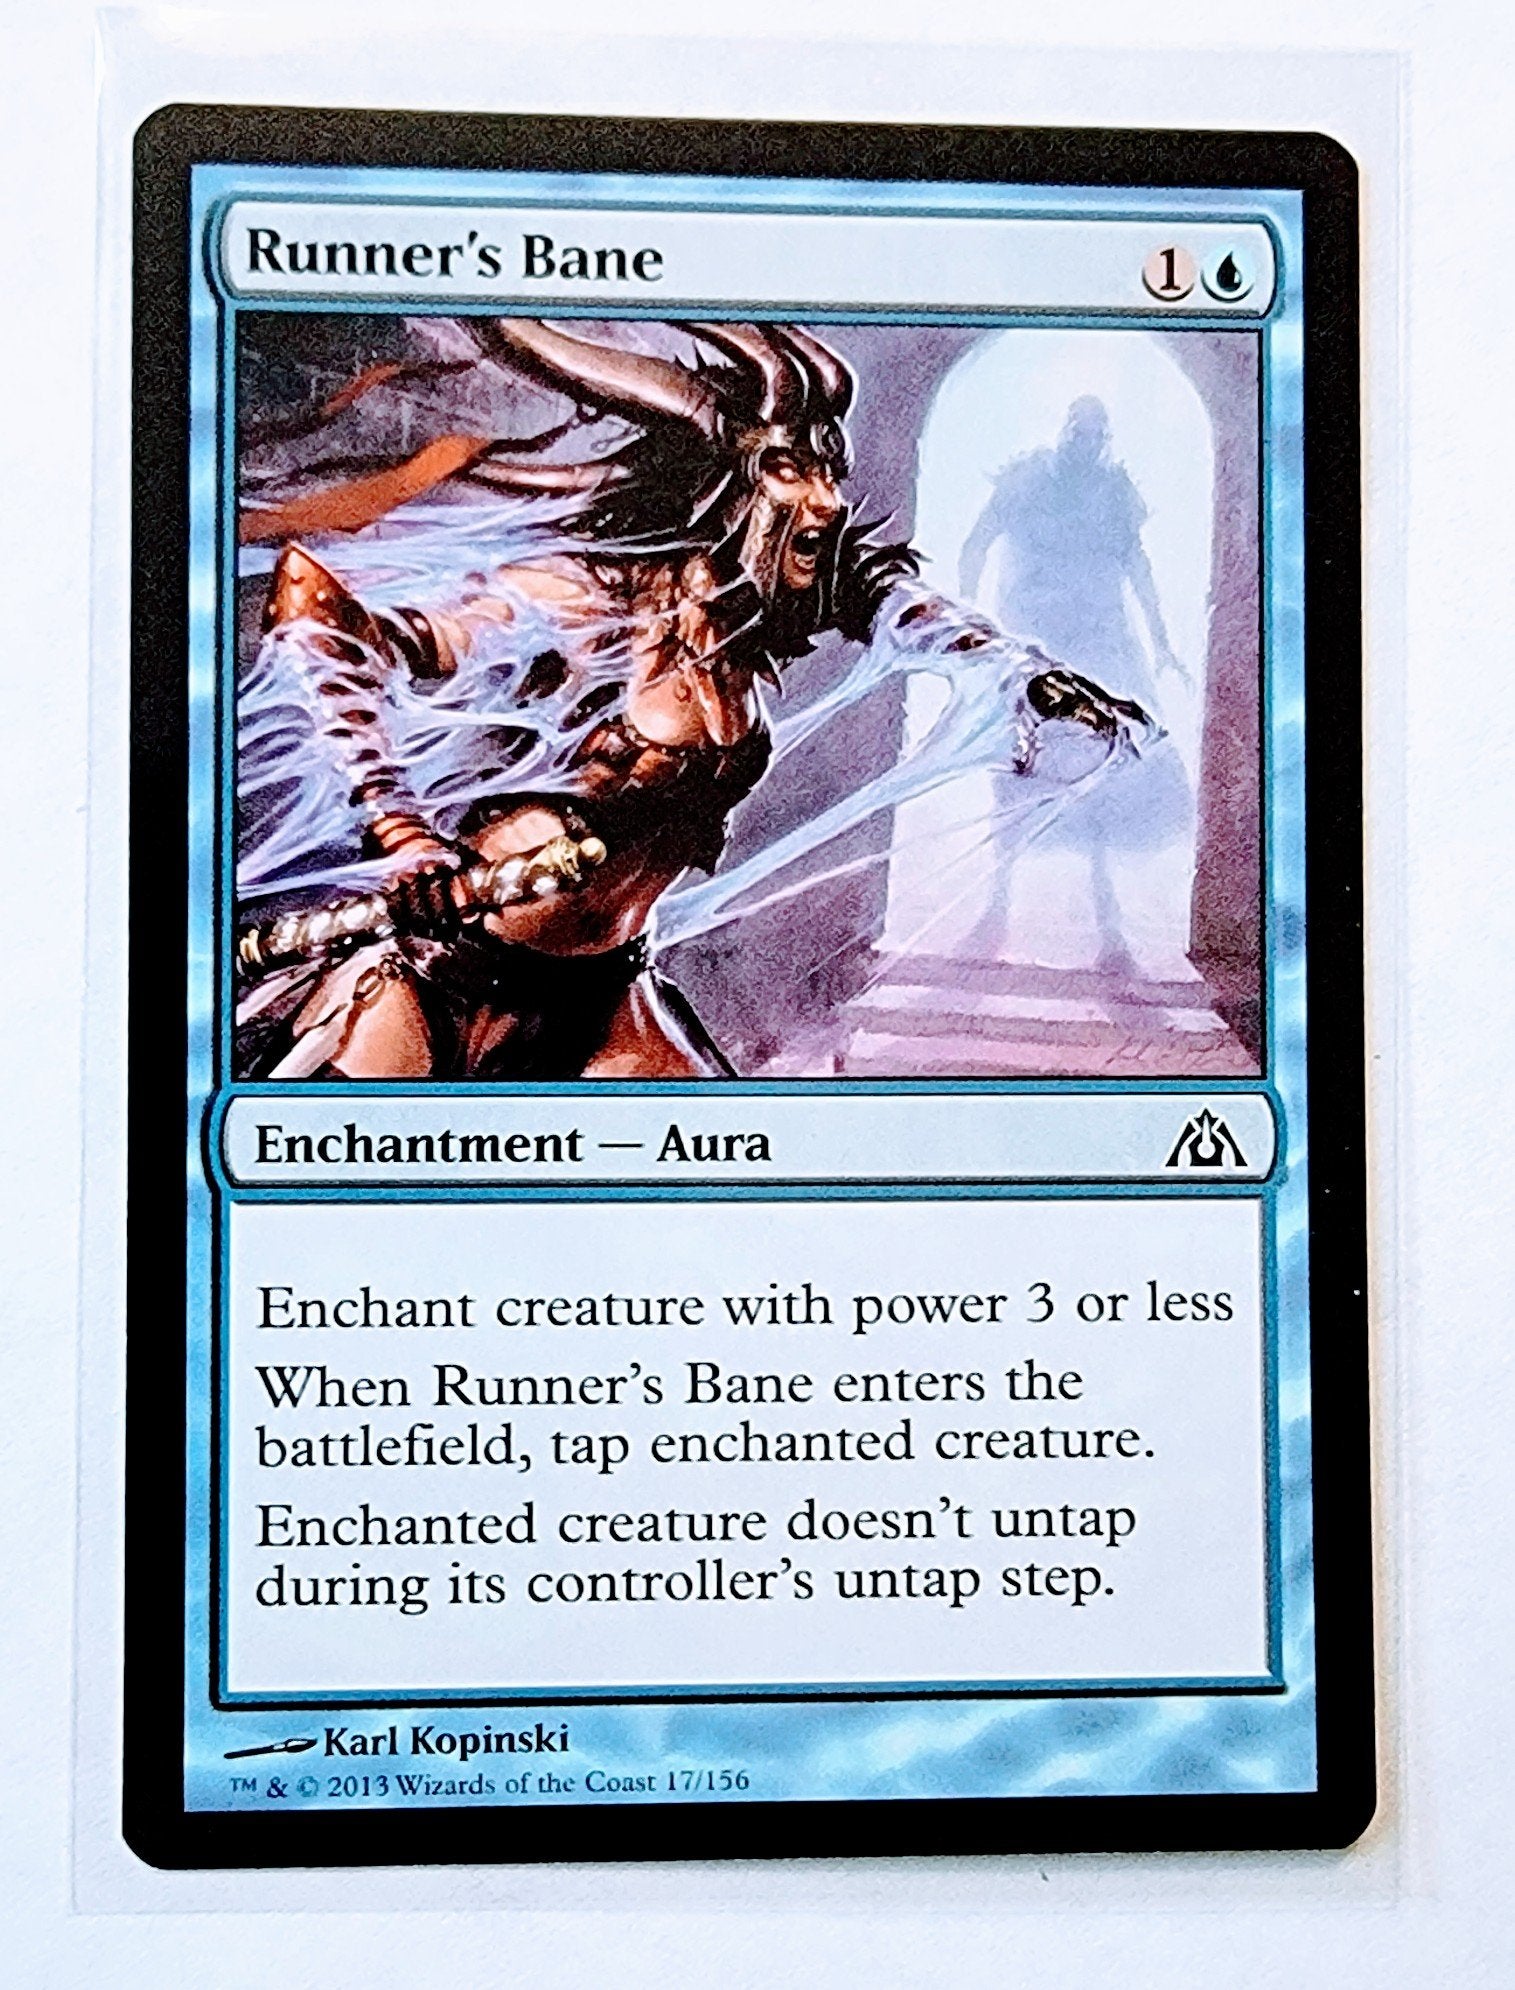 2013 Wizards of the Coast Magic: The Gathering - Runner's Bane Booster Card MCSC1 simple Xclusive Collectibles   